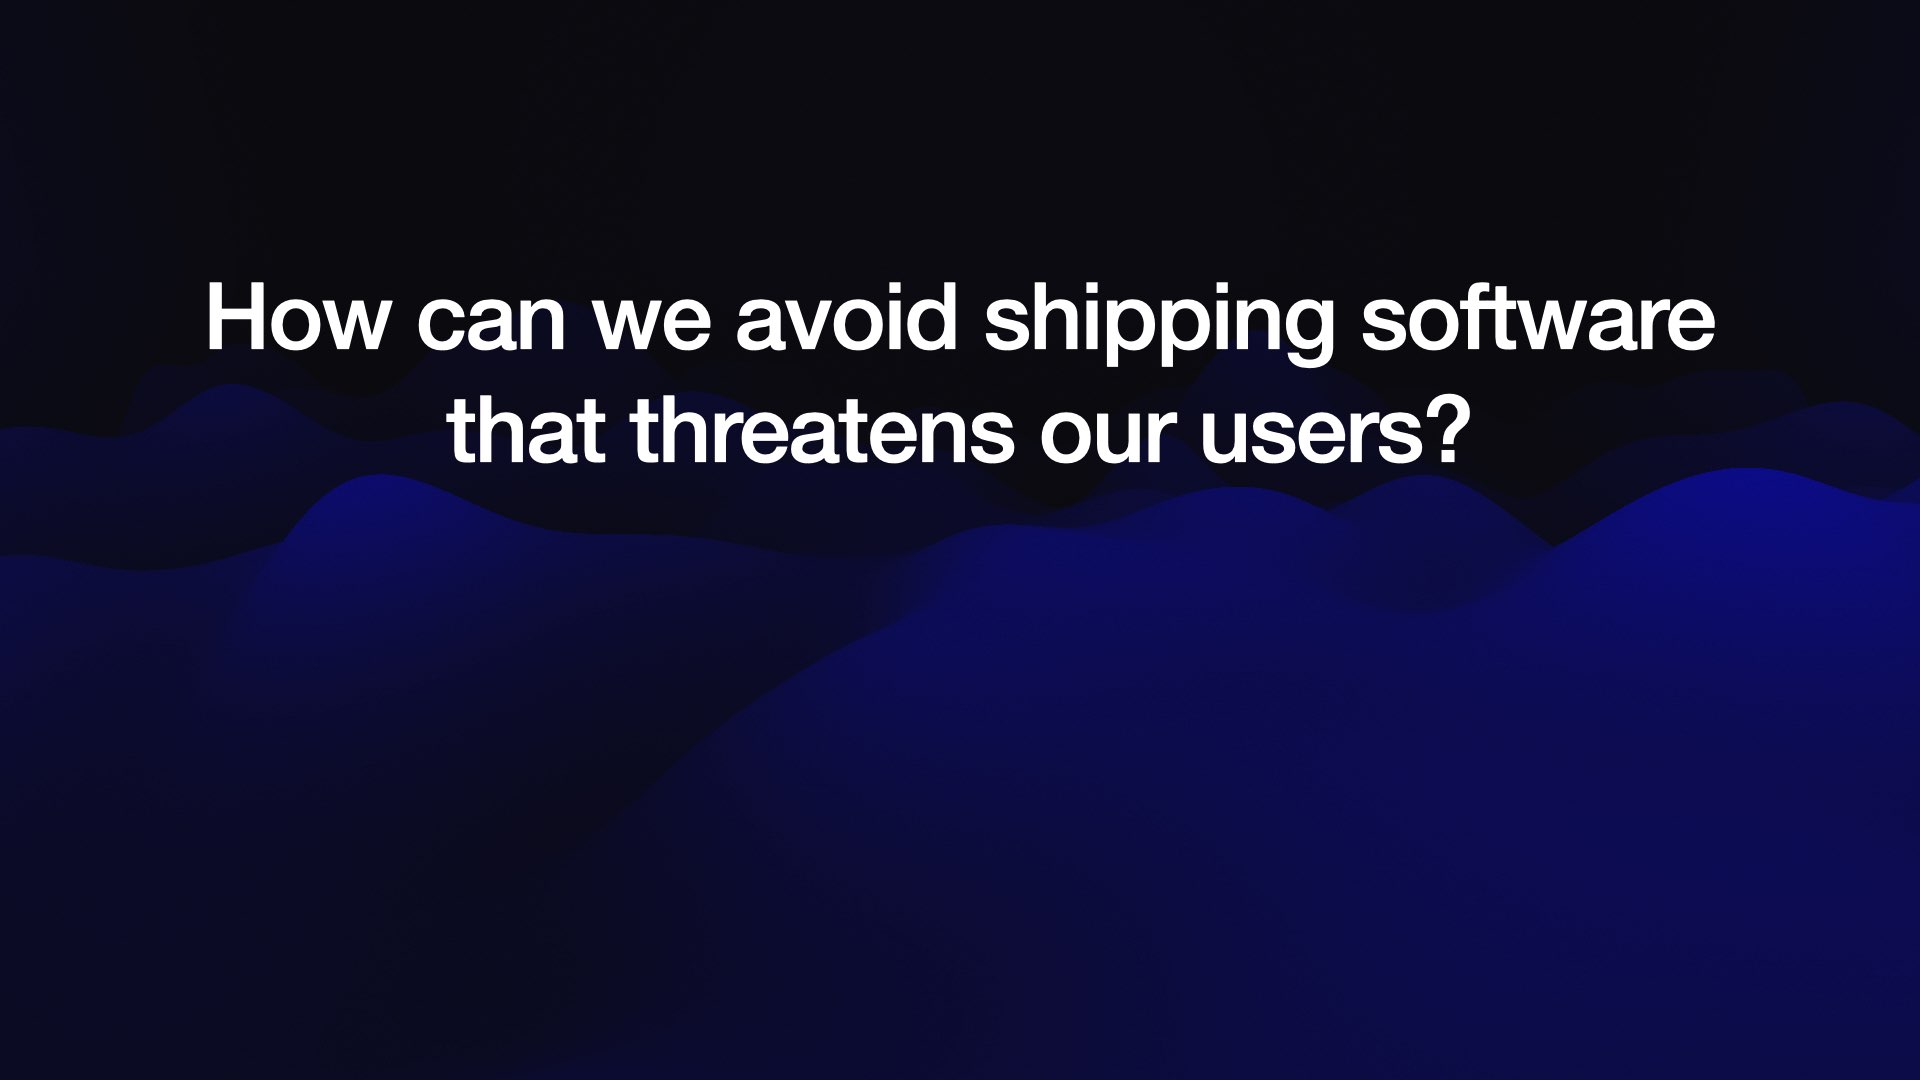 How can we avoid shipping software that threatens our users?